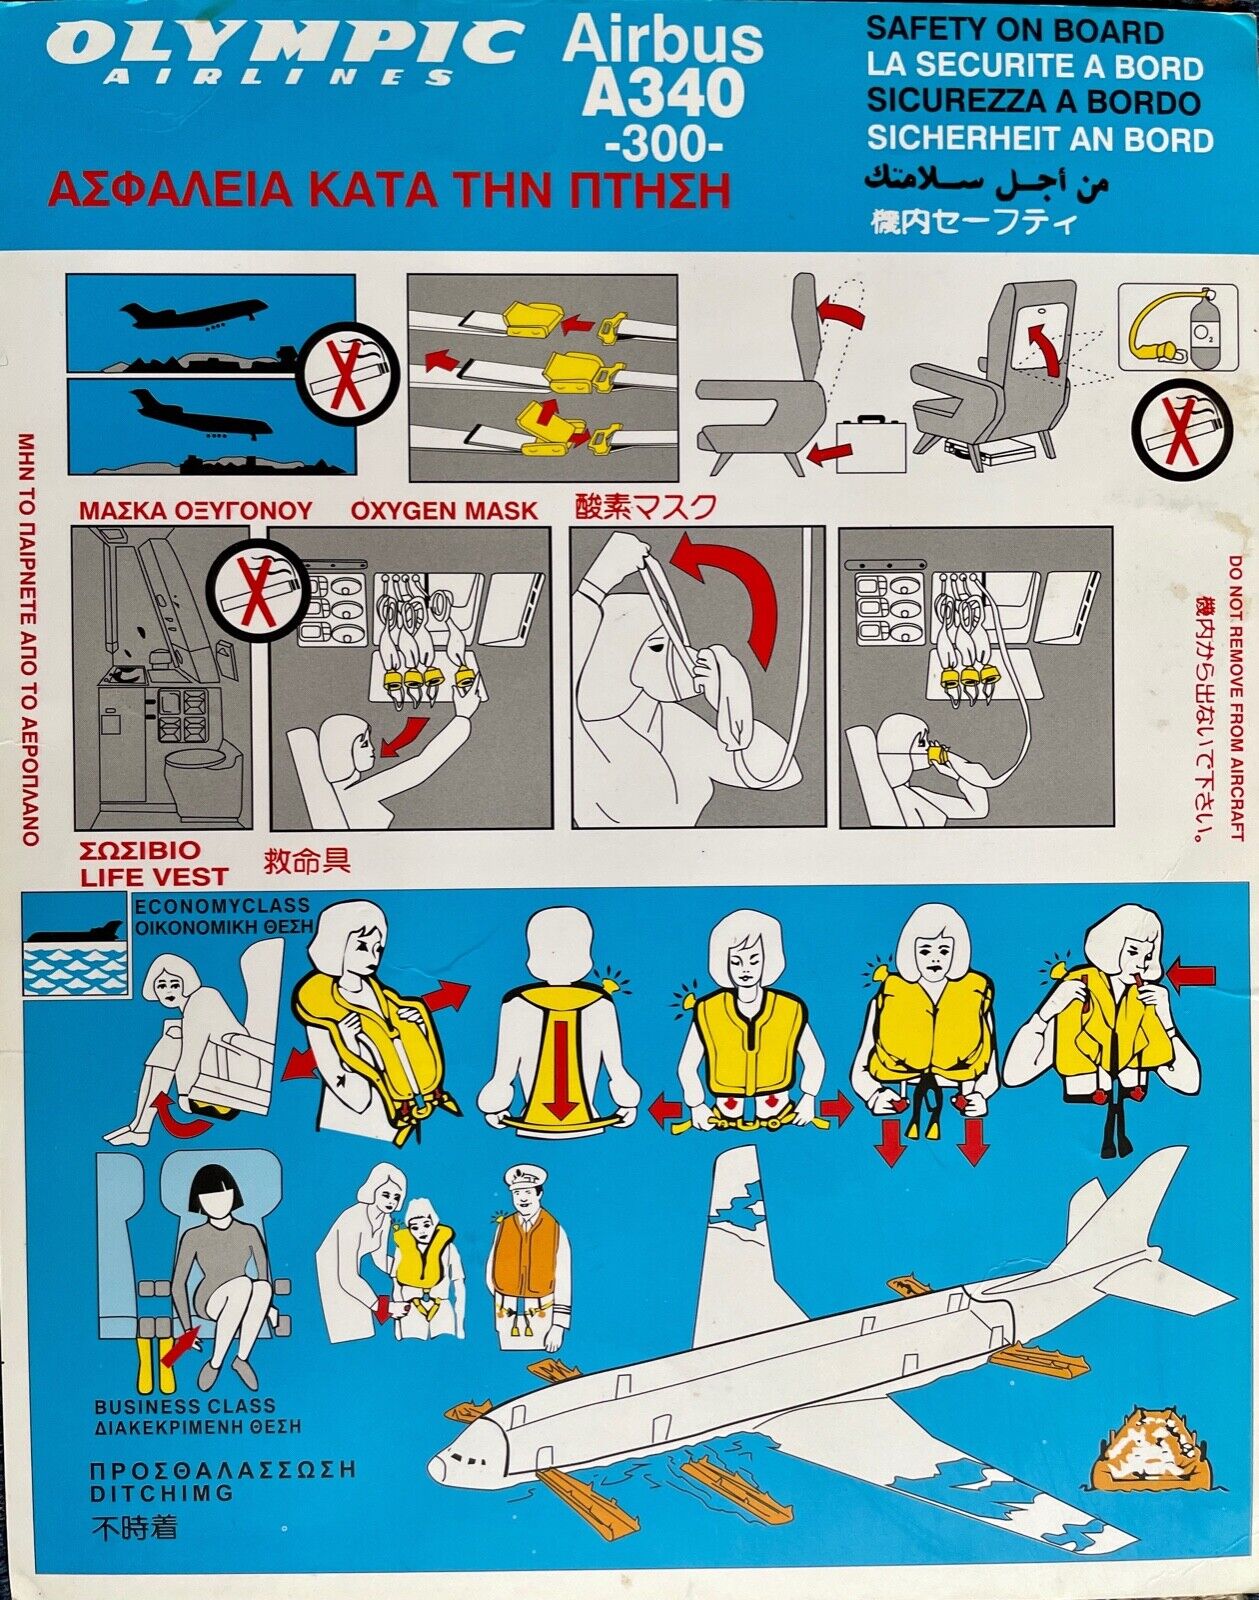 Olympic Airlines Airbus Industrie A340-300 Safety Card